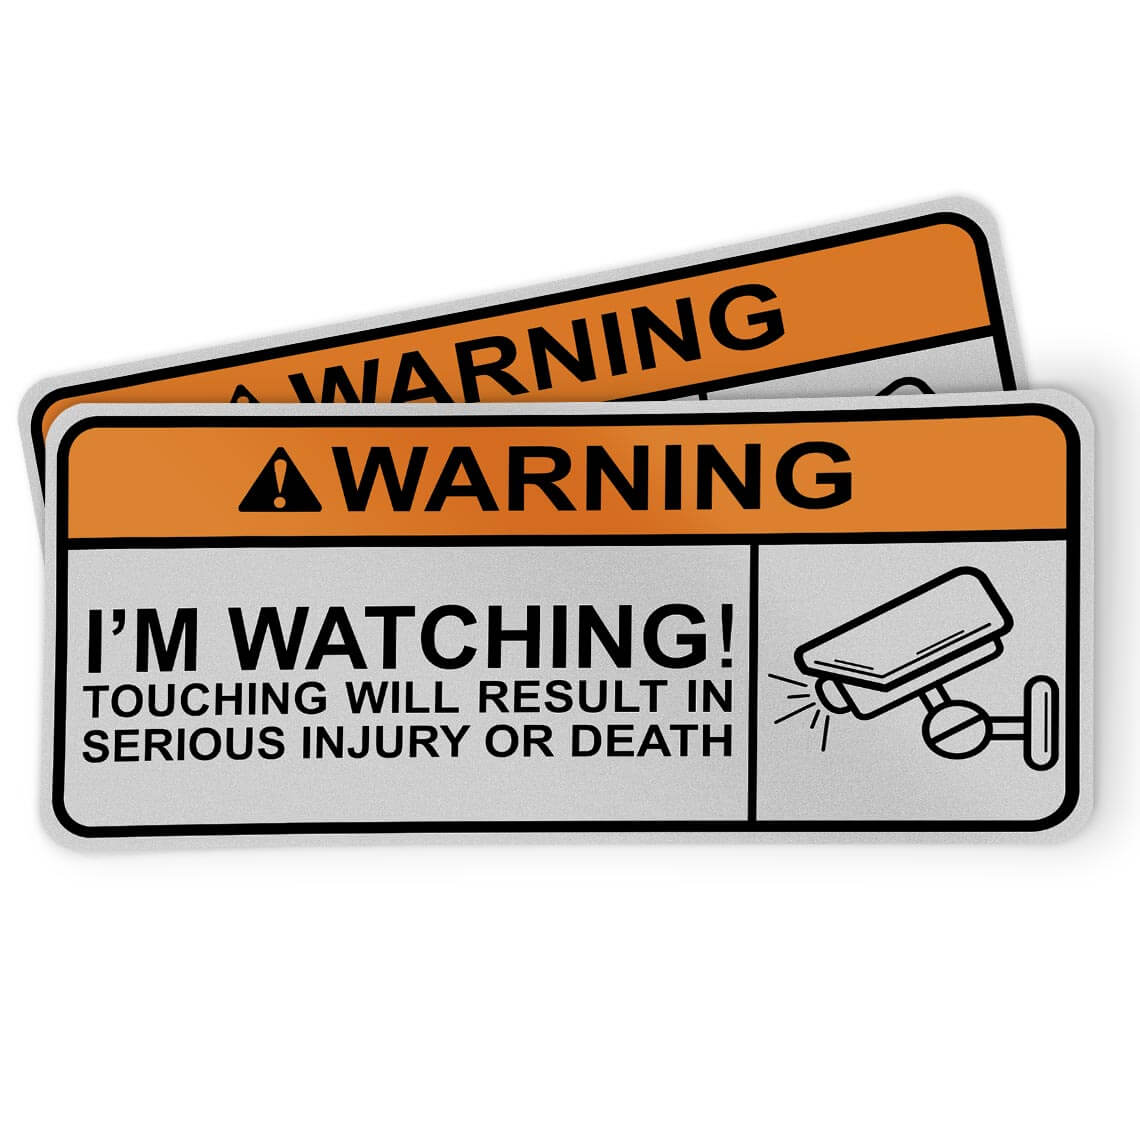 Funny Motorcycle Sticker - Warning - I'm watching! Touching will result in serious injury or death